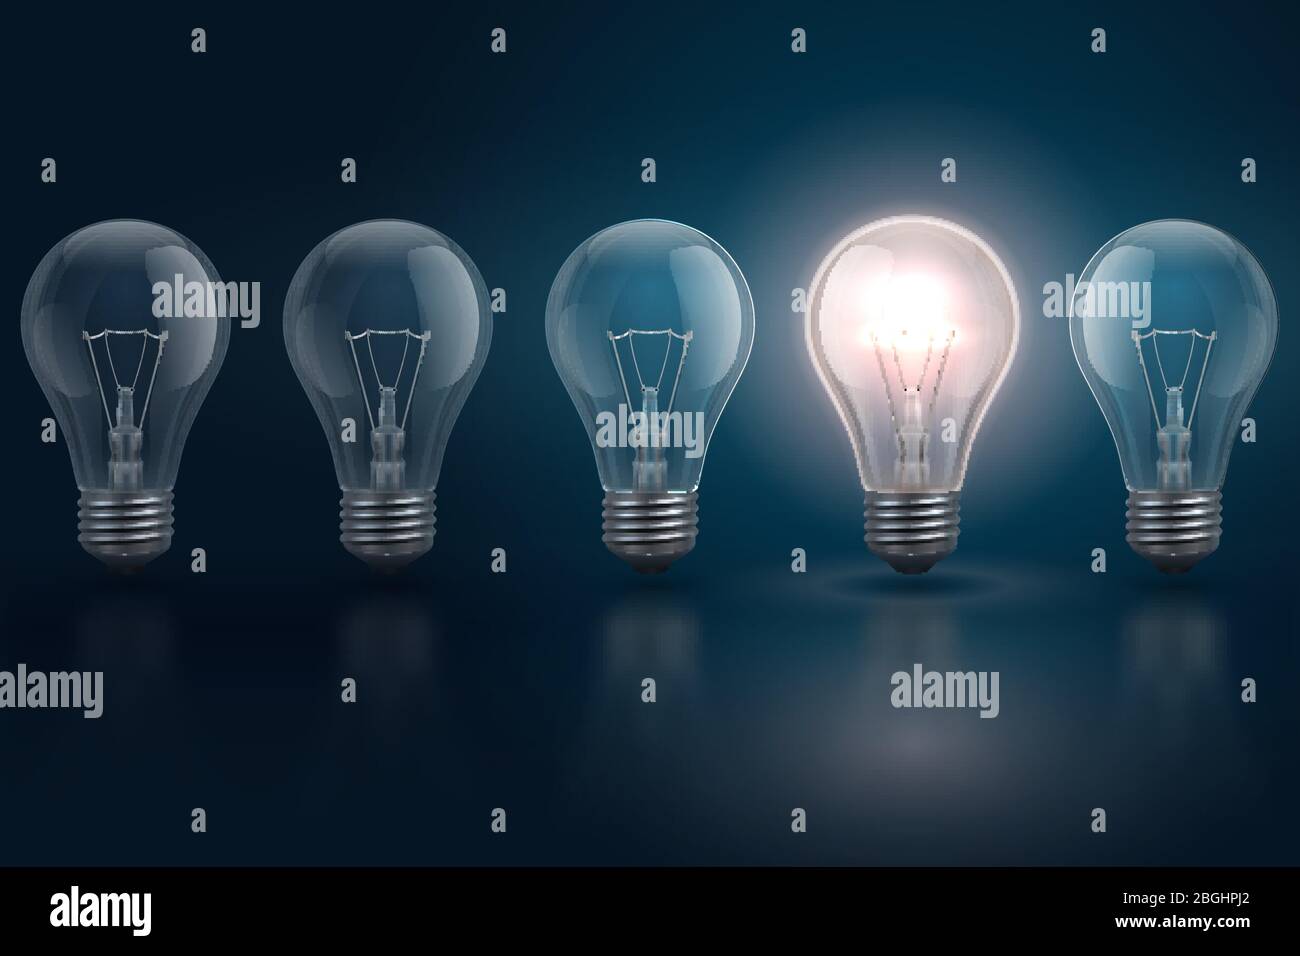 Creative idea concept with light bulbs and one of them is glowing. Leadership, individuality, opportunities business vector background. Innovation idea lightbulb, inspiration power bulb illustration Stock Vector